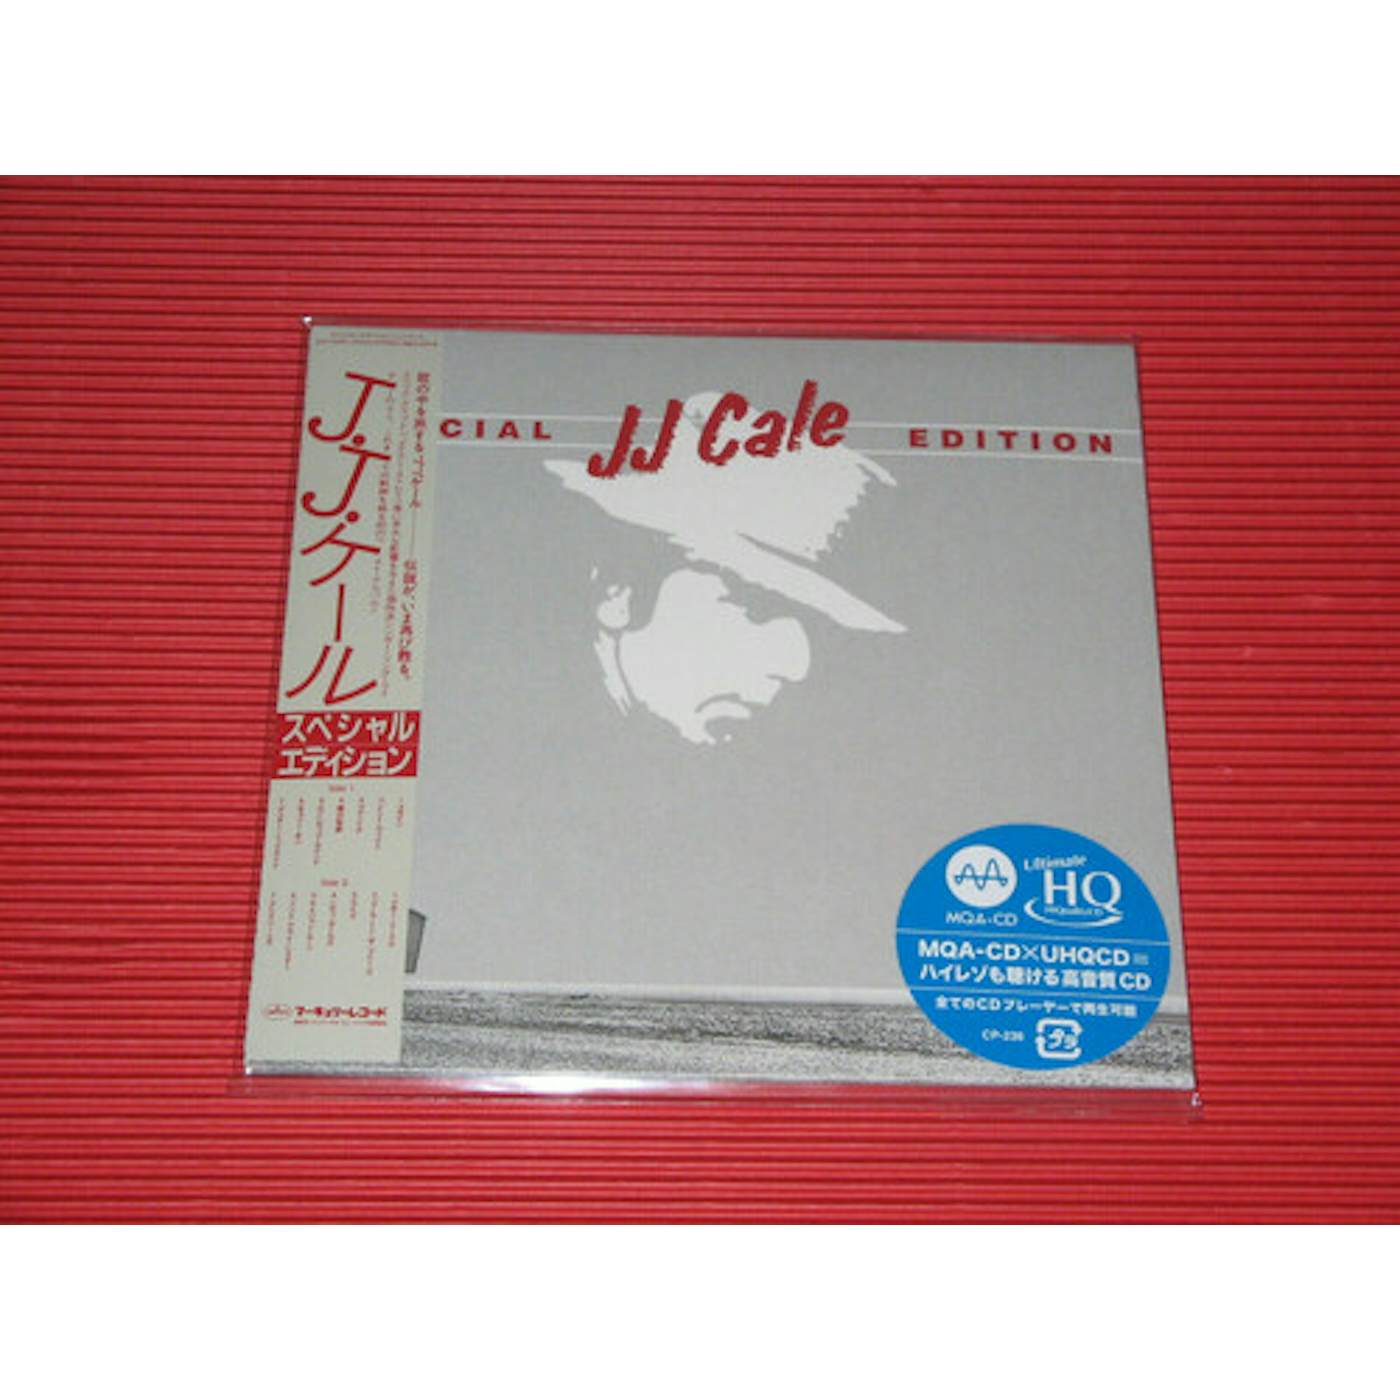 J.J. Cale SPECIAL EDITION CD